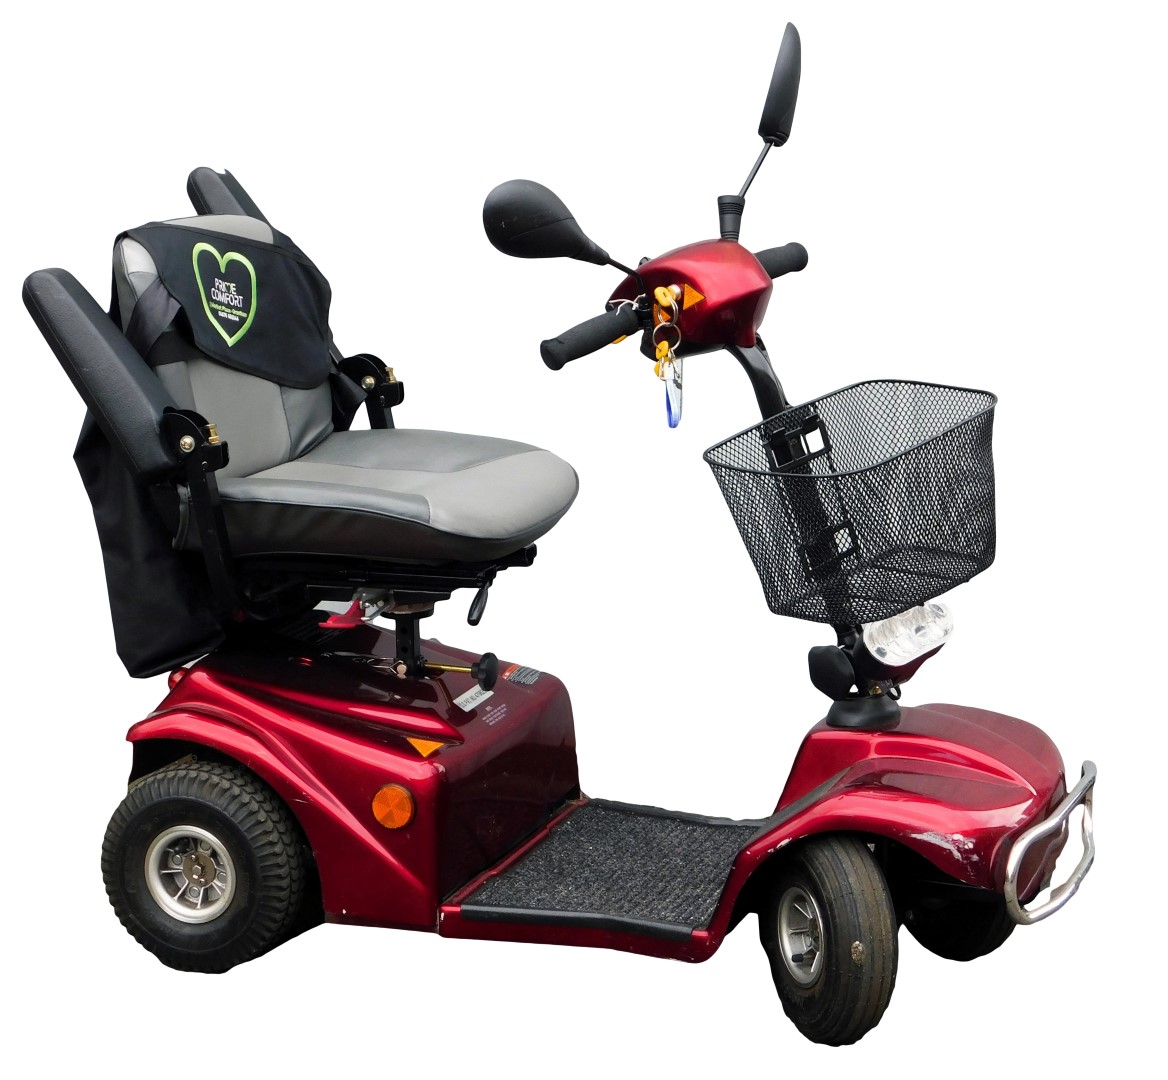 An electric mobility scooter with red paint work, and battery charger.